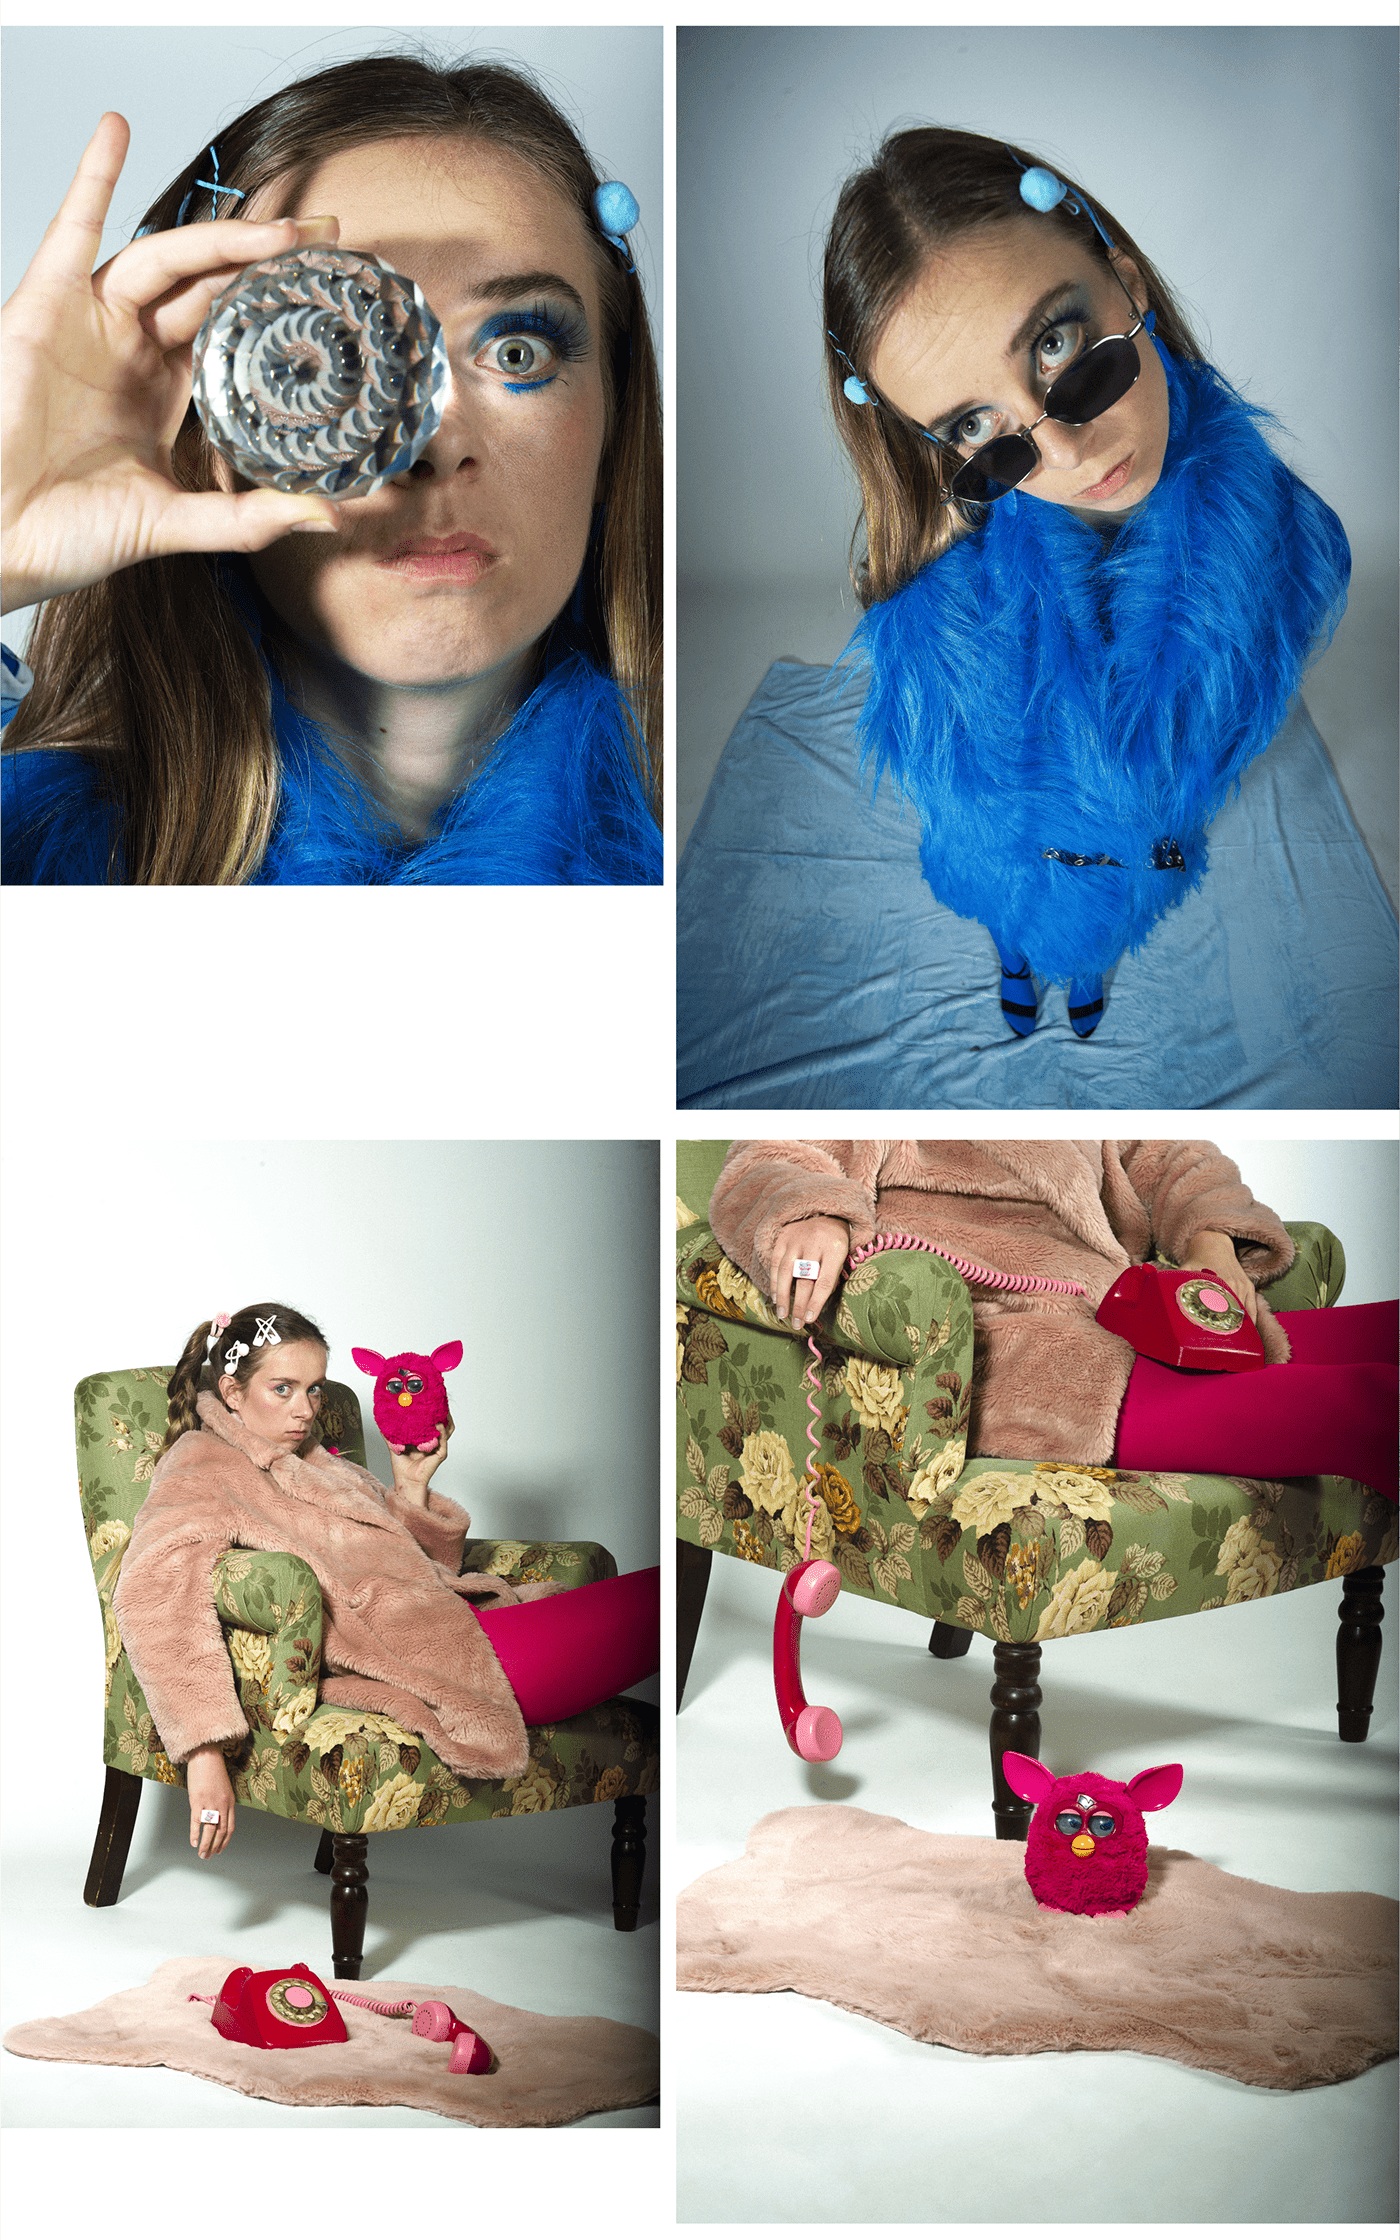 ArtDirection fashioneditorial fashion photography design graphic design  Photography  proyect Fashion  Furby 90s